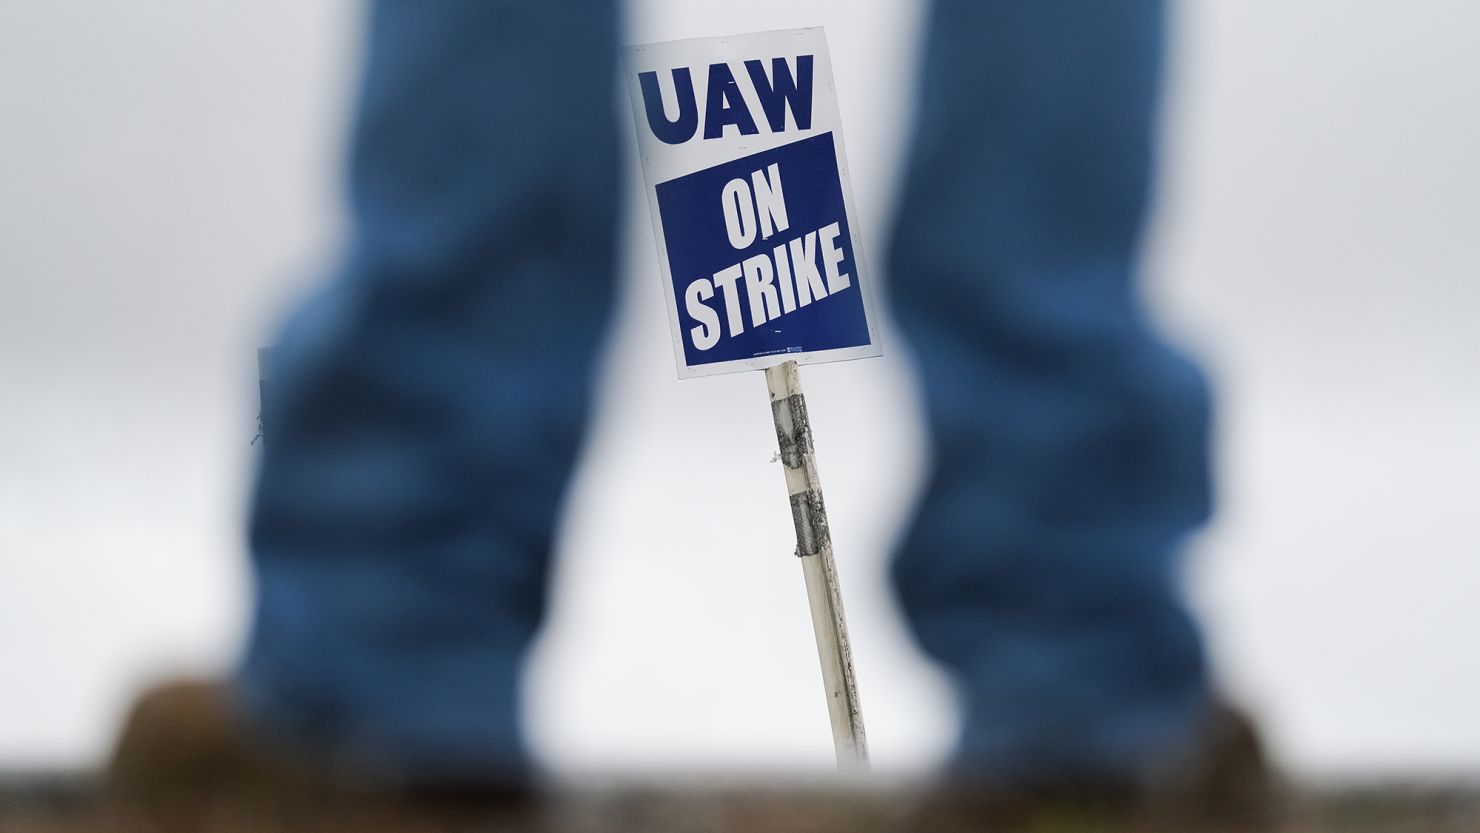 The United Auto Workers union is gearing up for organizing campaigns at non-union automakers.